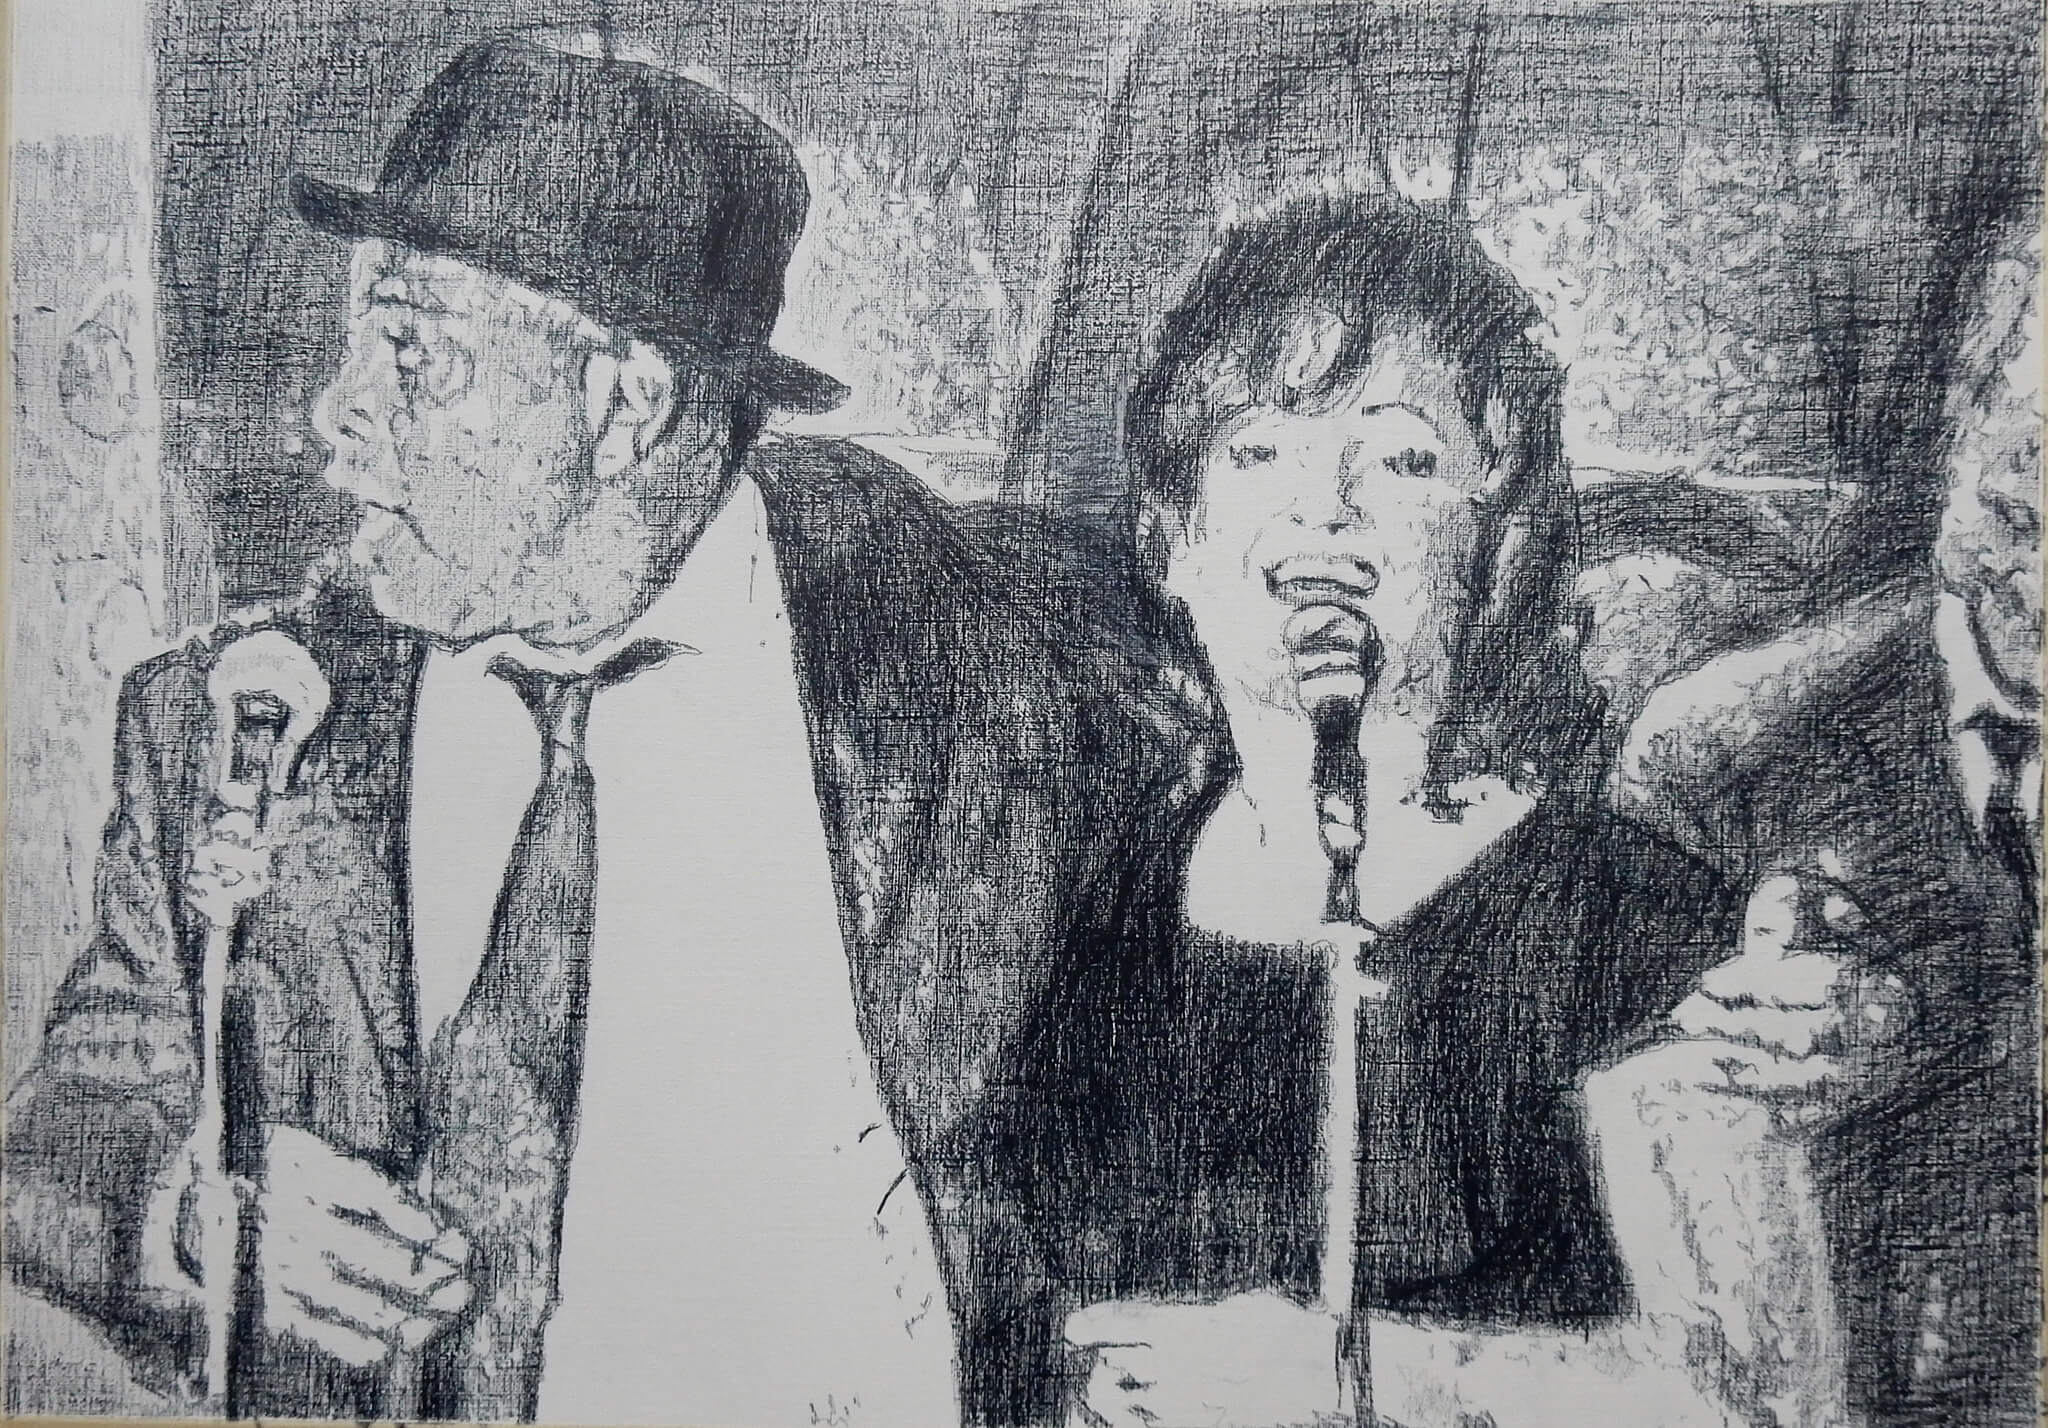 The Rawhides Blues Brothers tribute band pencil on paper drawing by Stella Tooth.